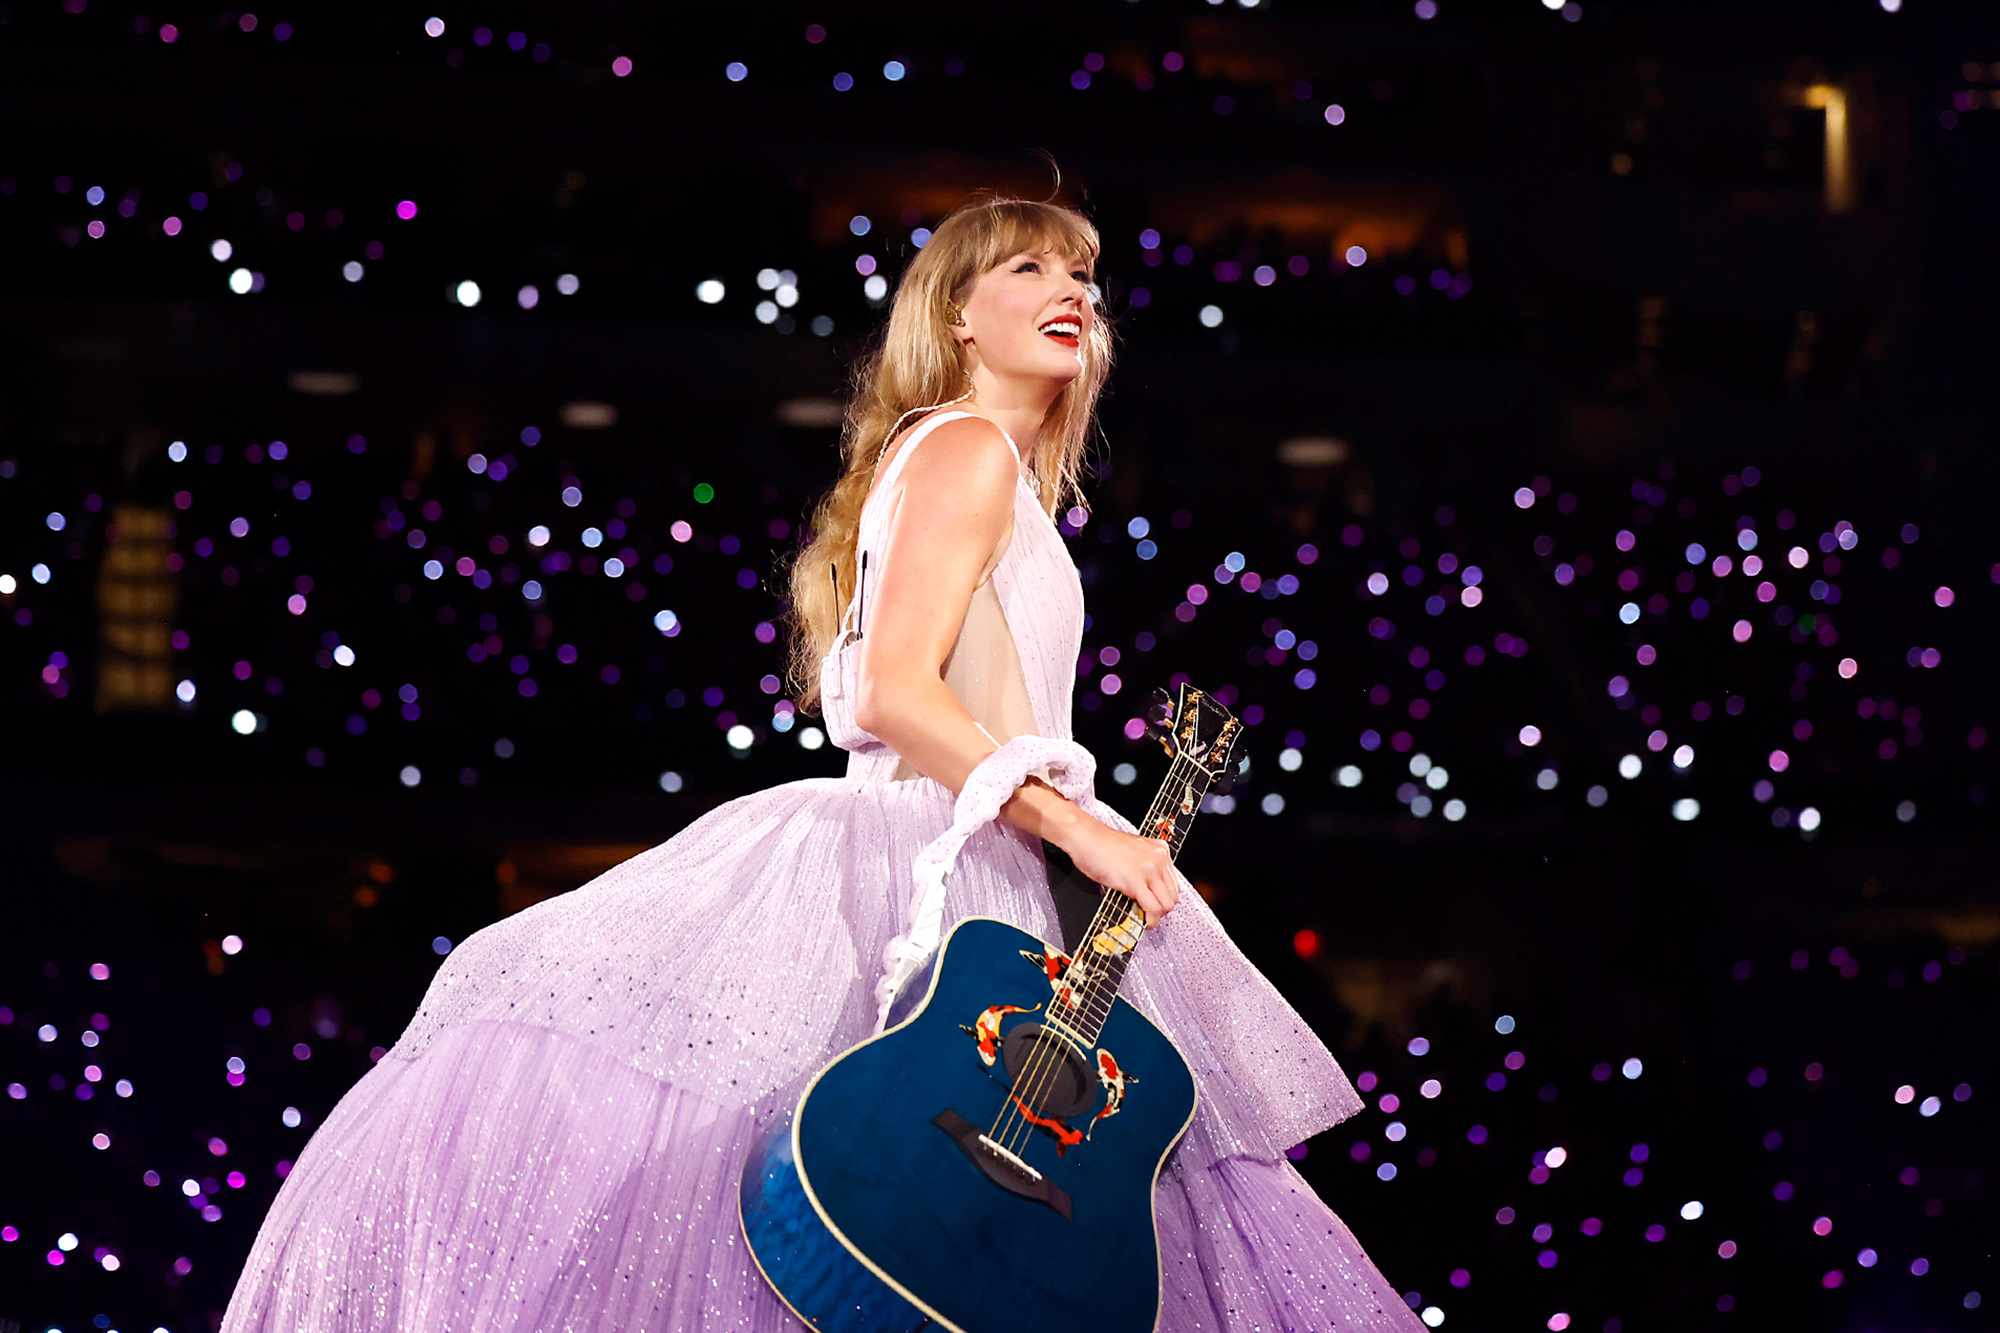 taylor swift concerts increase hotel prices by up to 154% — these are the destinations and dates to avoid